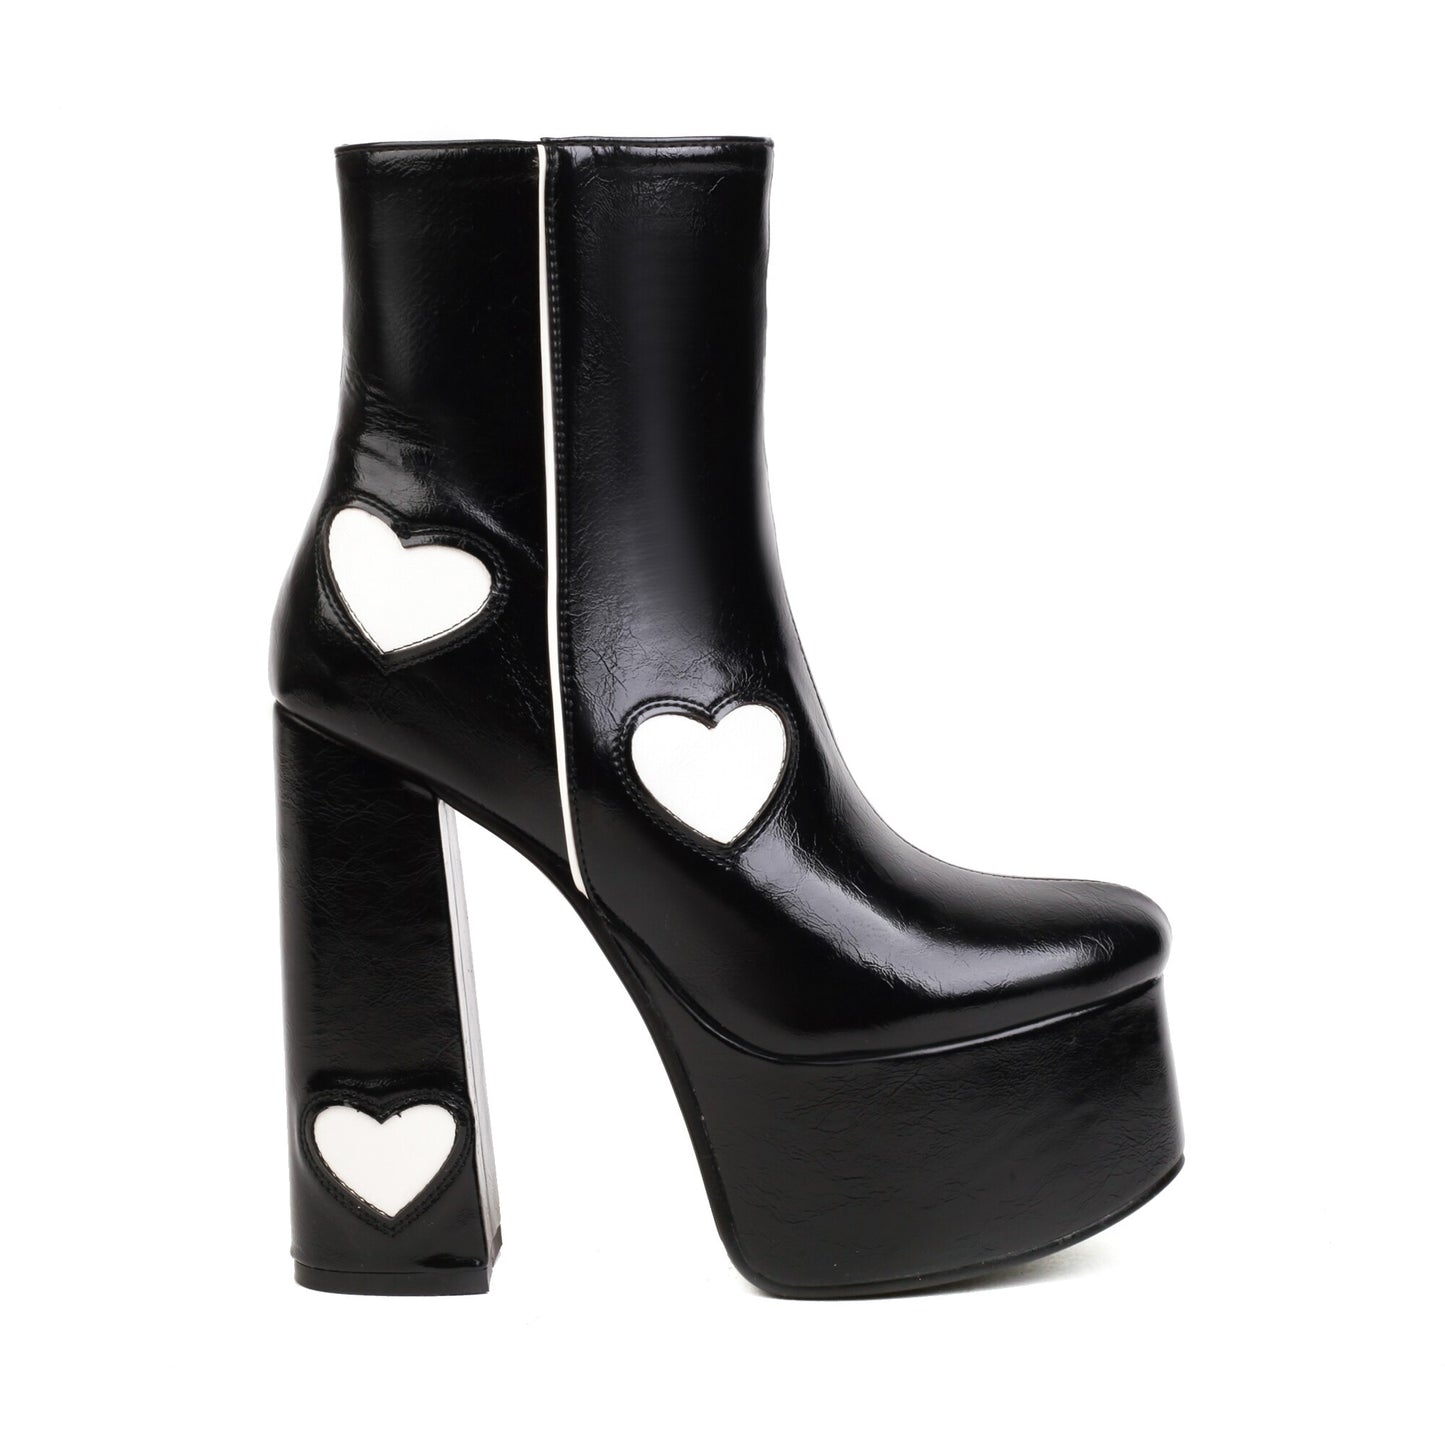 Mod White Ankle Boots, Chunky Heel Boots, Gogo Ankle Boots, Heart Patch Boots,